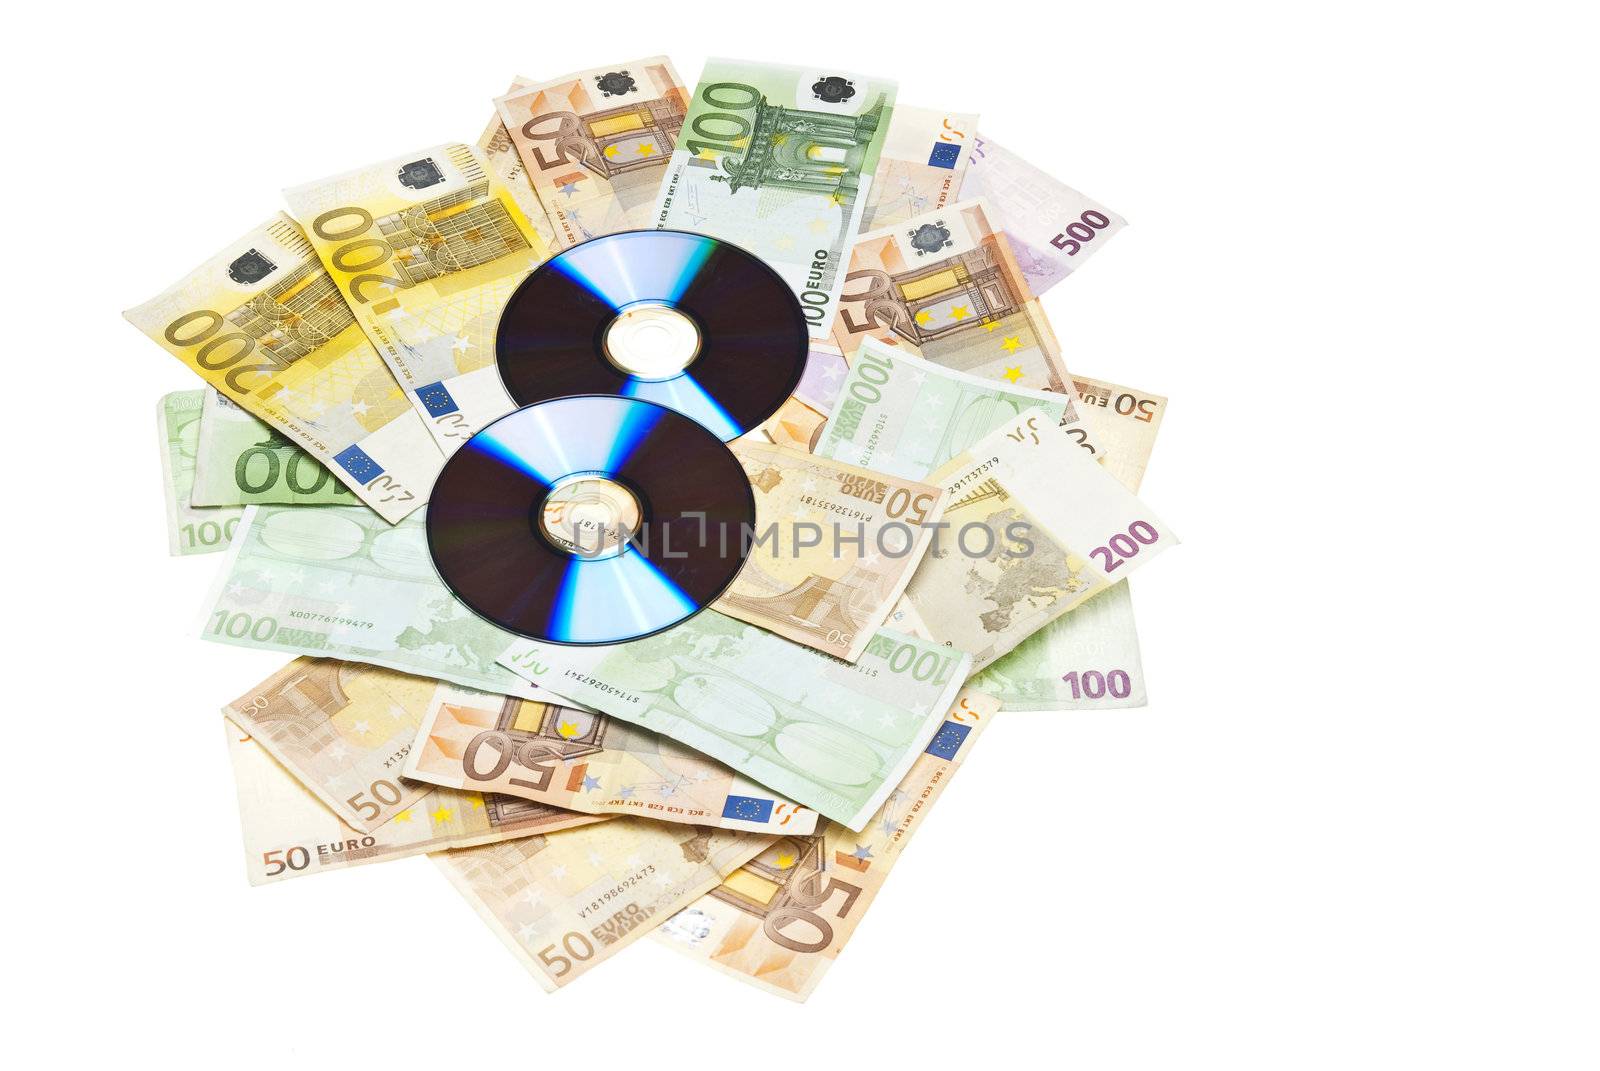 Compact Disks with euros by adamr